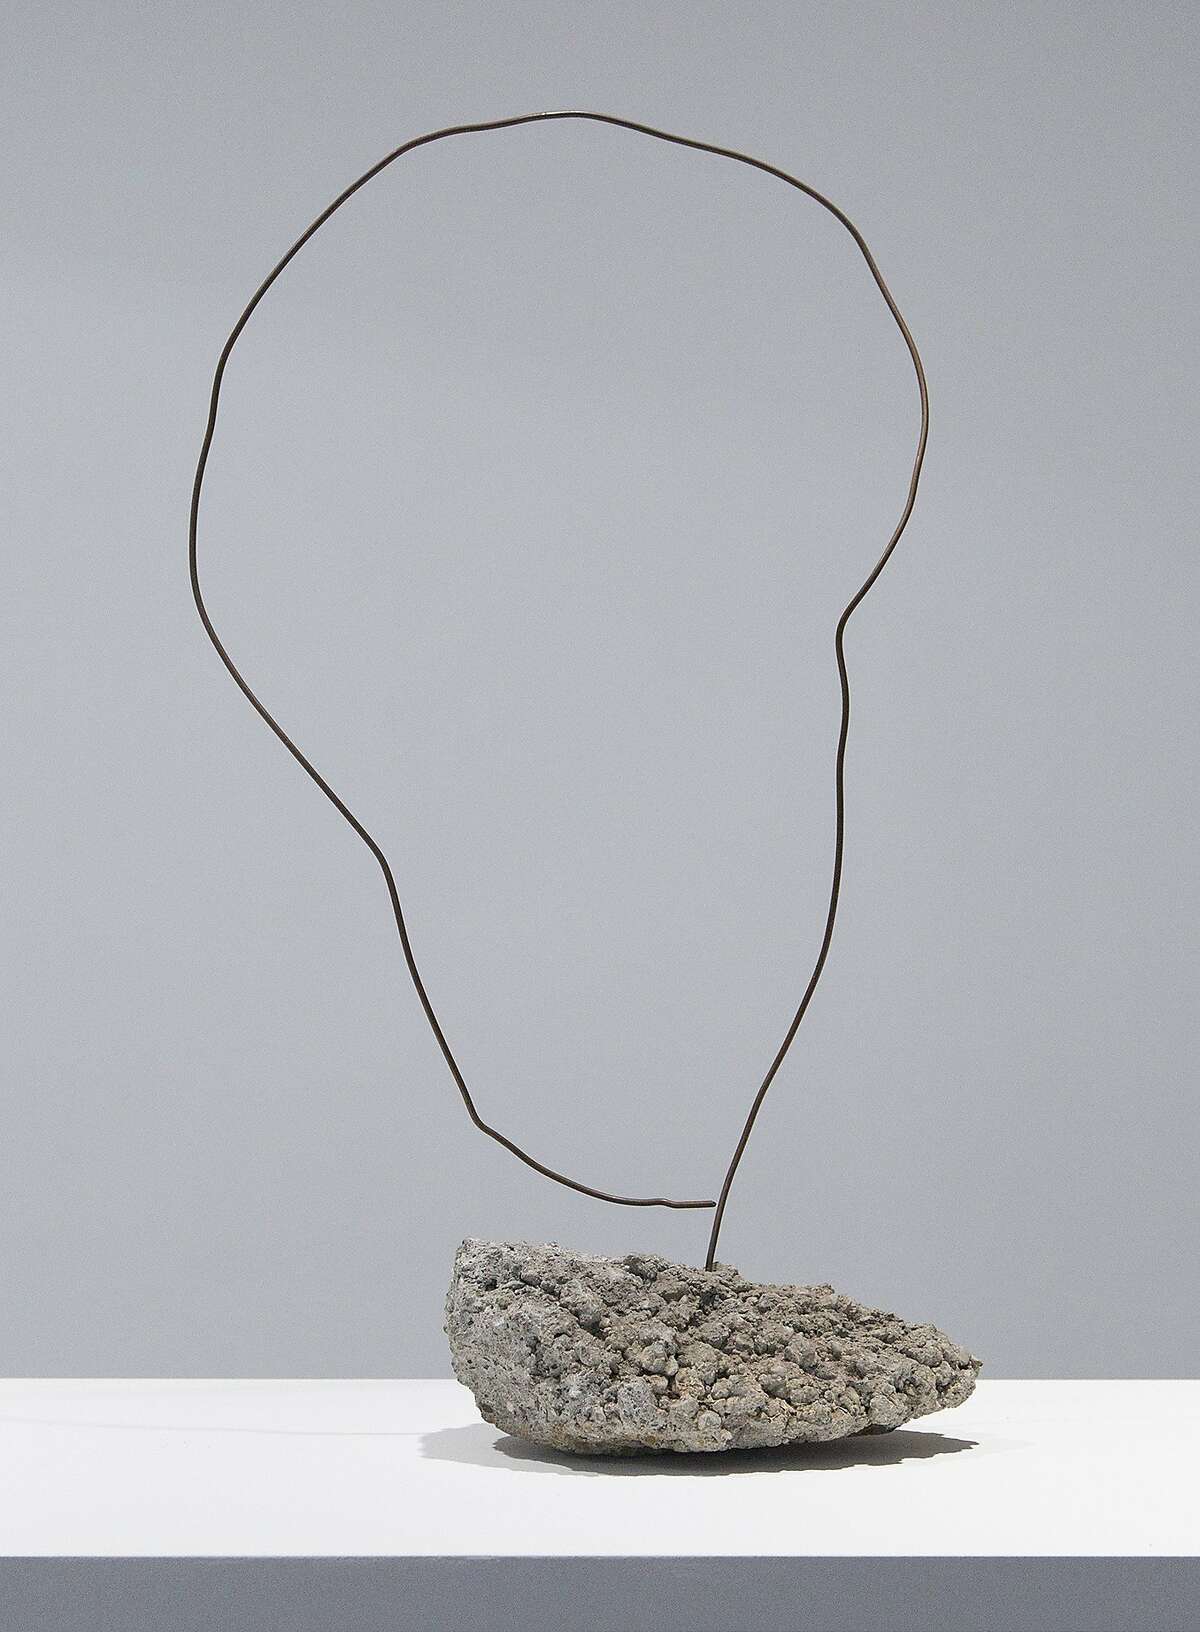 An untitled work by David Ireland, on view at San Francisco Art Institute, epitomizes his use of such simple materials as wire and concrete. The form refers to an elephant's ear or a map of Africa.